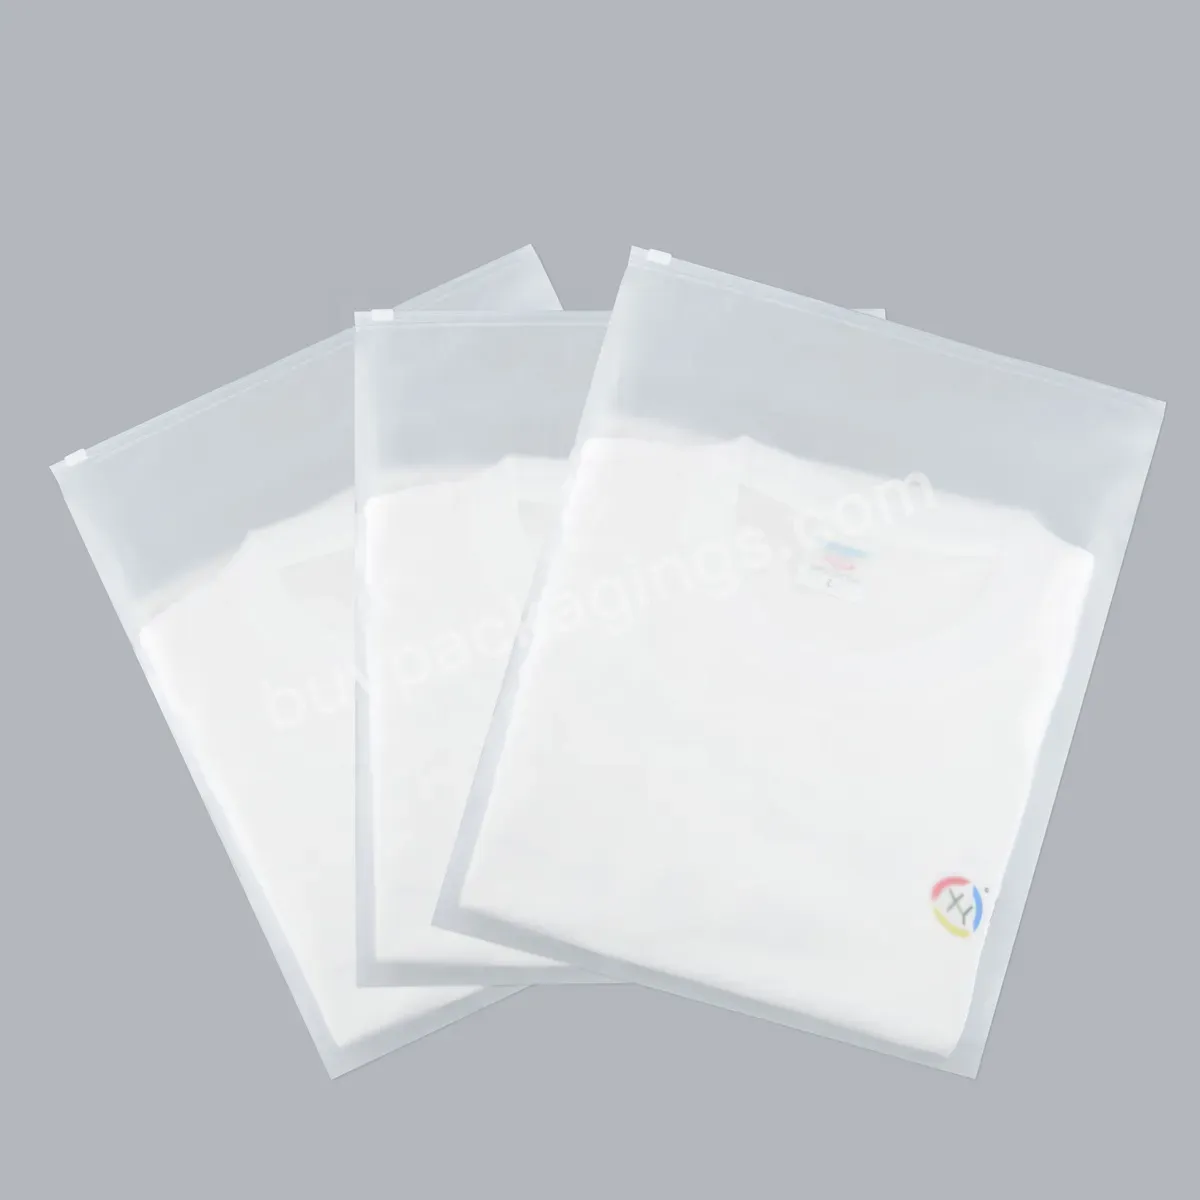 30*40cm Custom Printed Frosted Clear Zipper Plastic Bag Clothing Packaging Zip Lock Bags Shipping Packages - Buy Printed Zip Lock Plastic Bags,Frosted Clothing Bags,Zip Lock Bags For Clothes.